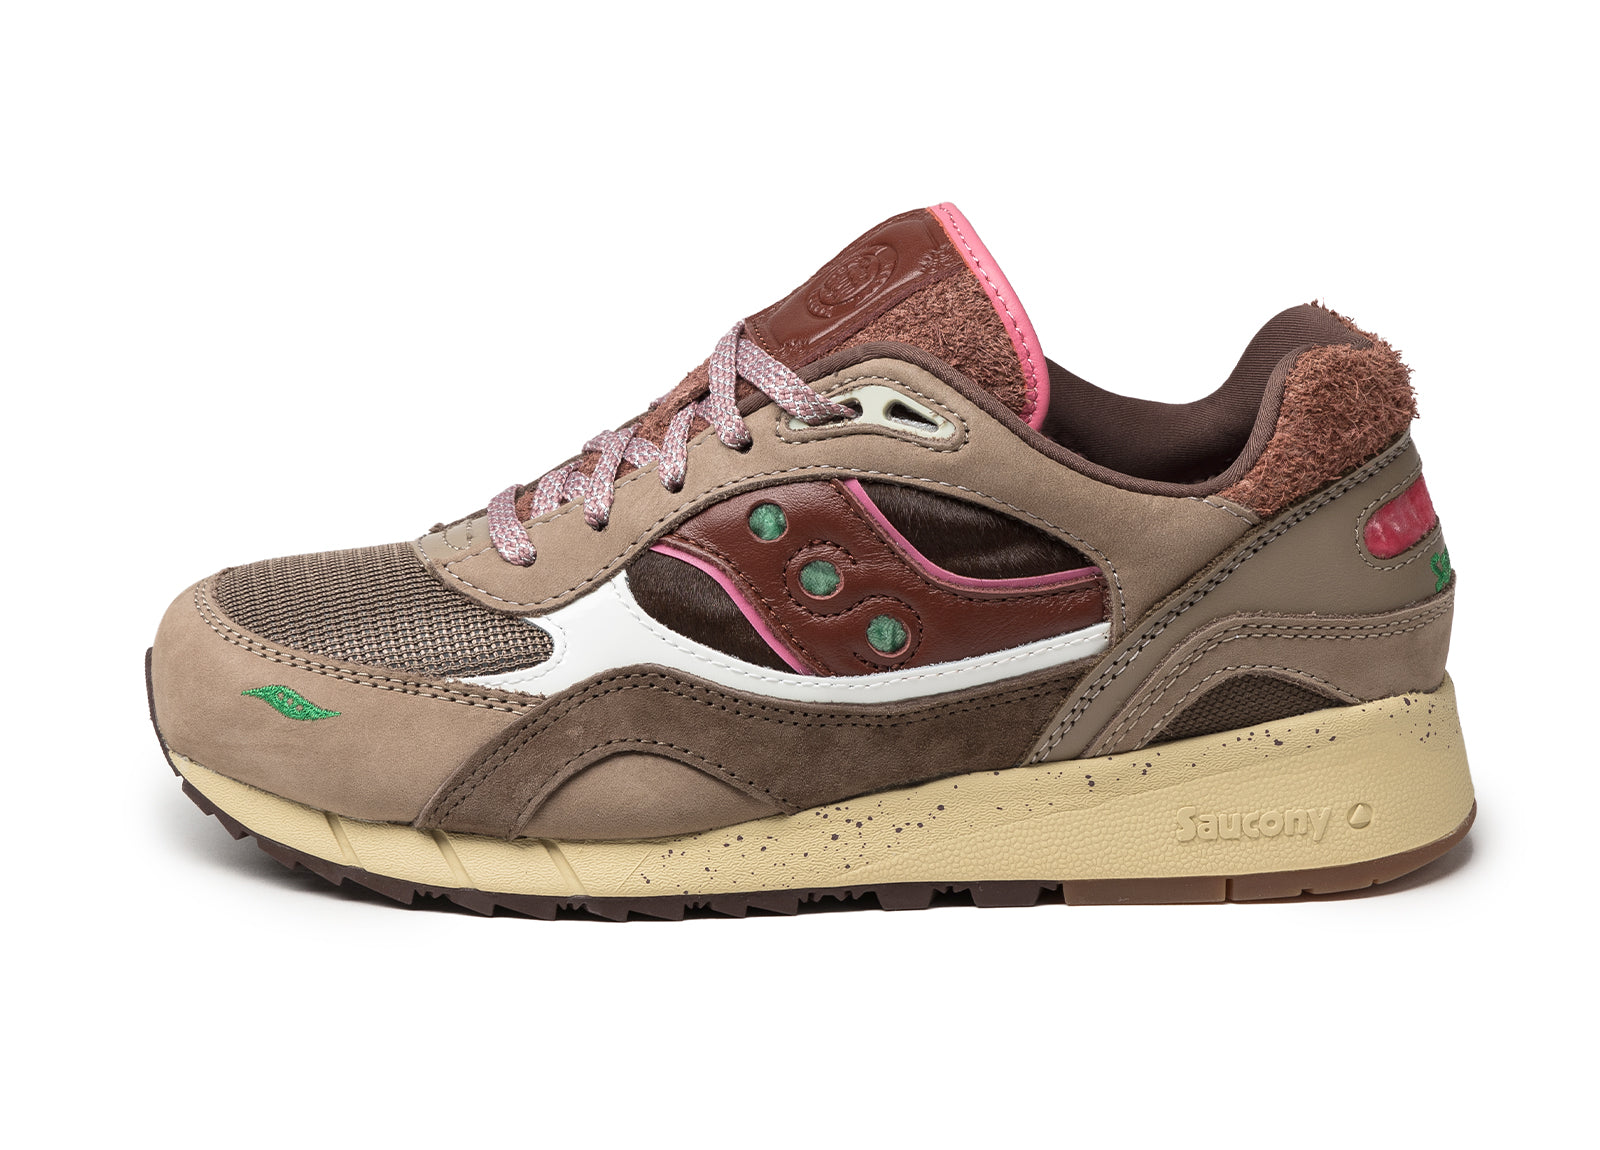 Saucony x Feature
Shadow 6000
« $5000 Chip »